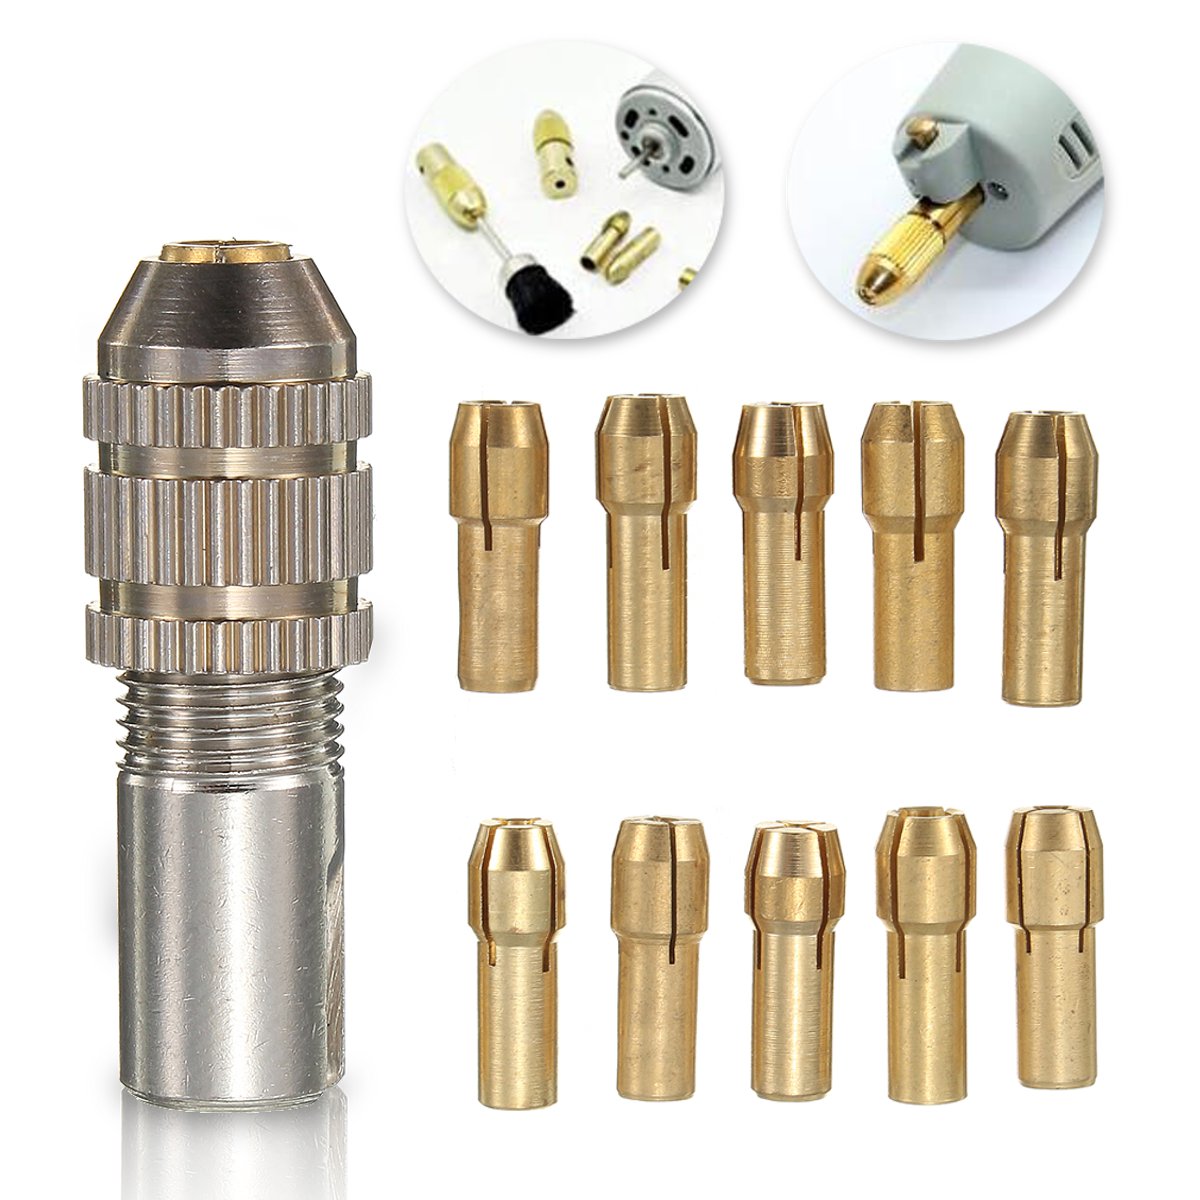 

10pcs 0.5-3.2mm Collet with 1pc Drill Chuck Mini Electric Drill Bit Collet Set